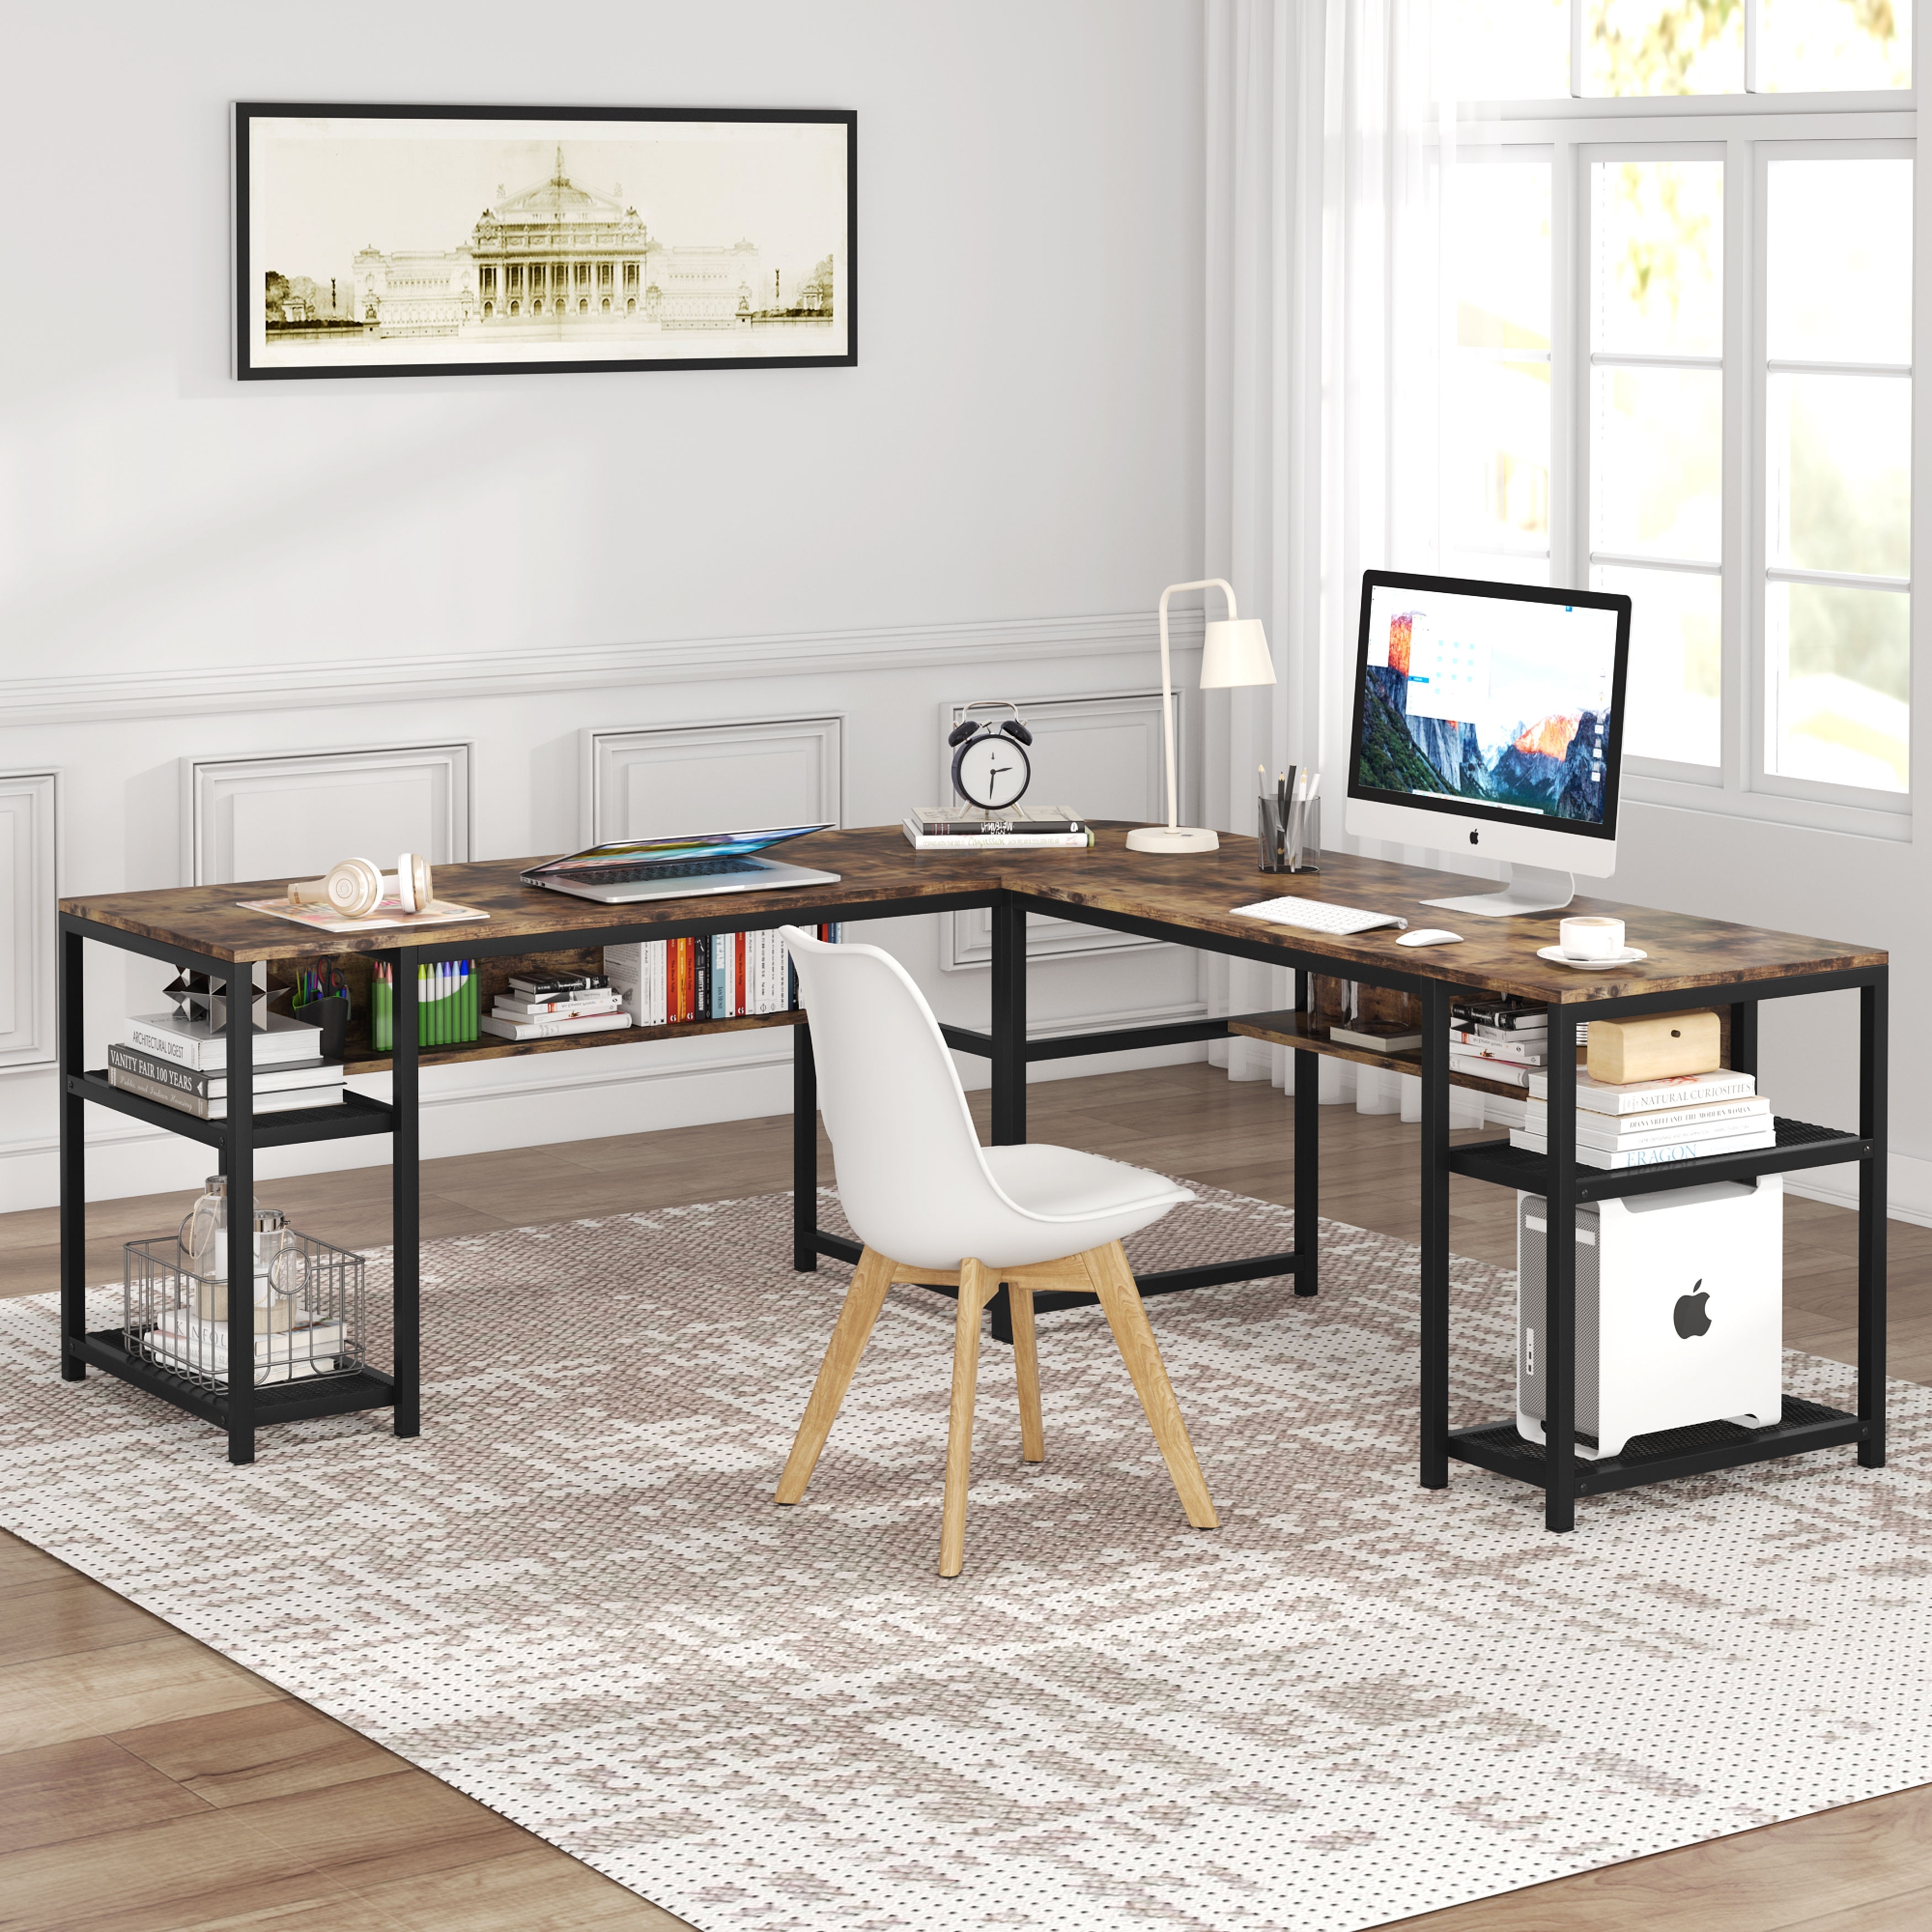 https://ak1.ostkcdn.com/images/products/is/images/direct/e7f87cc51e6174d4ed092635e4d7ddb1e811c229/L-Shaped-Computer-Desk-with-Storage-Shelf%2C-Study-Table.jpg